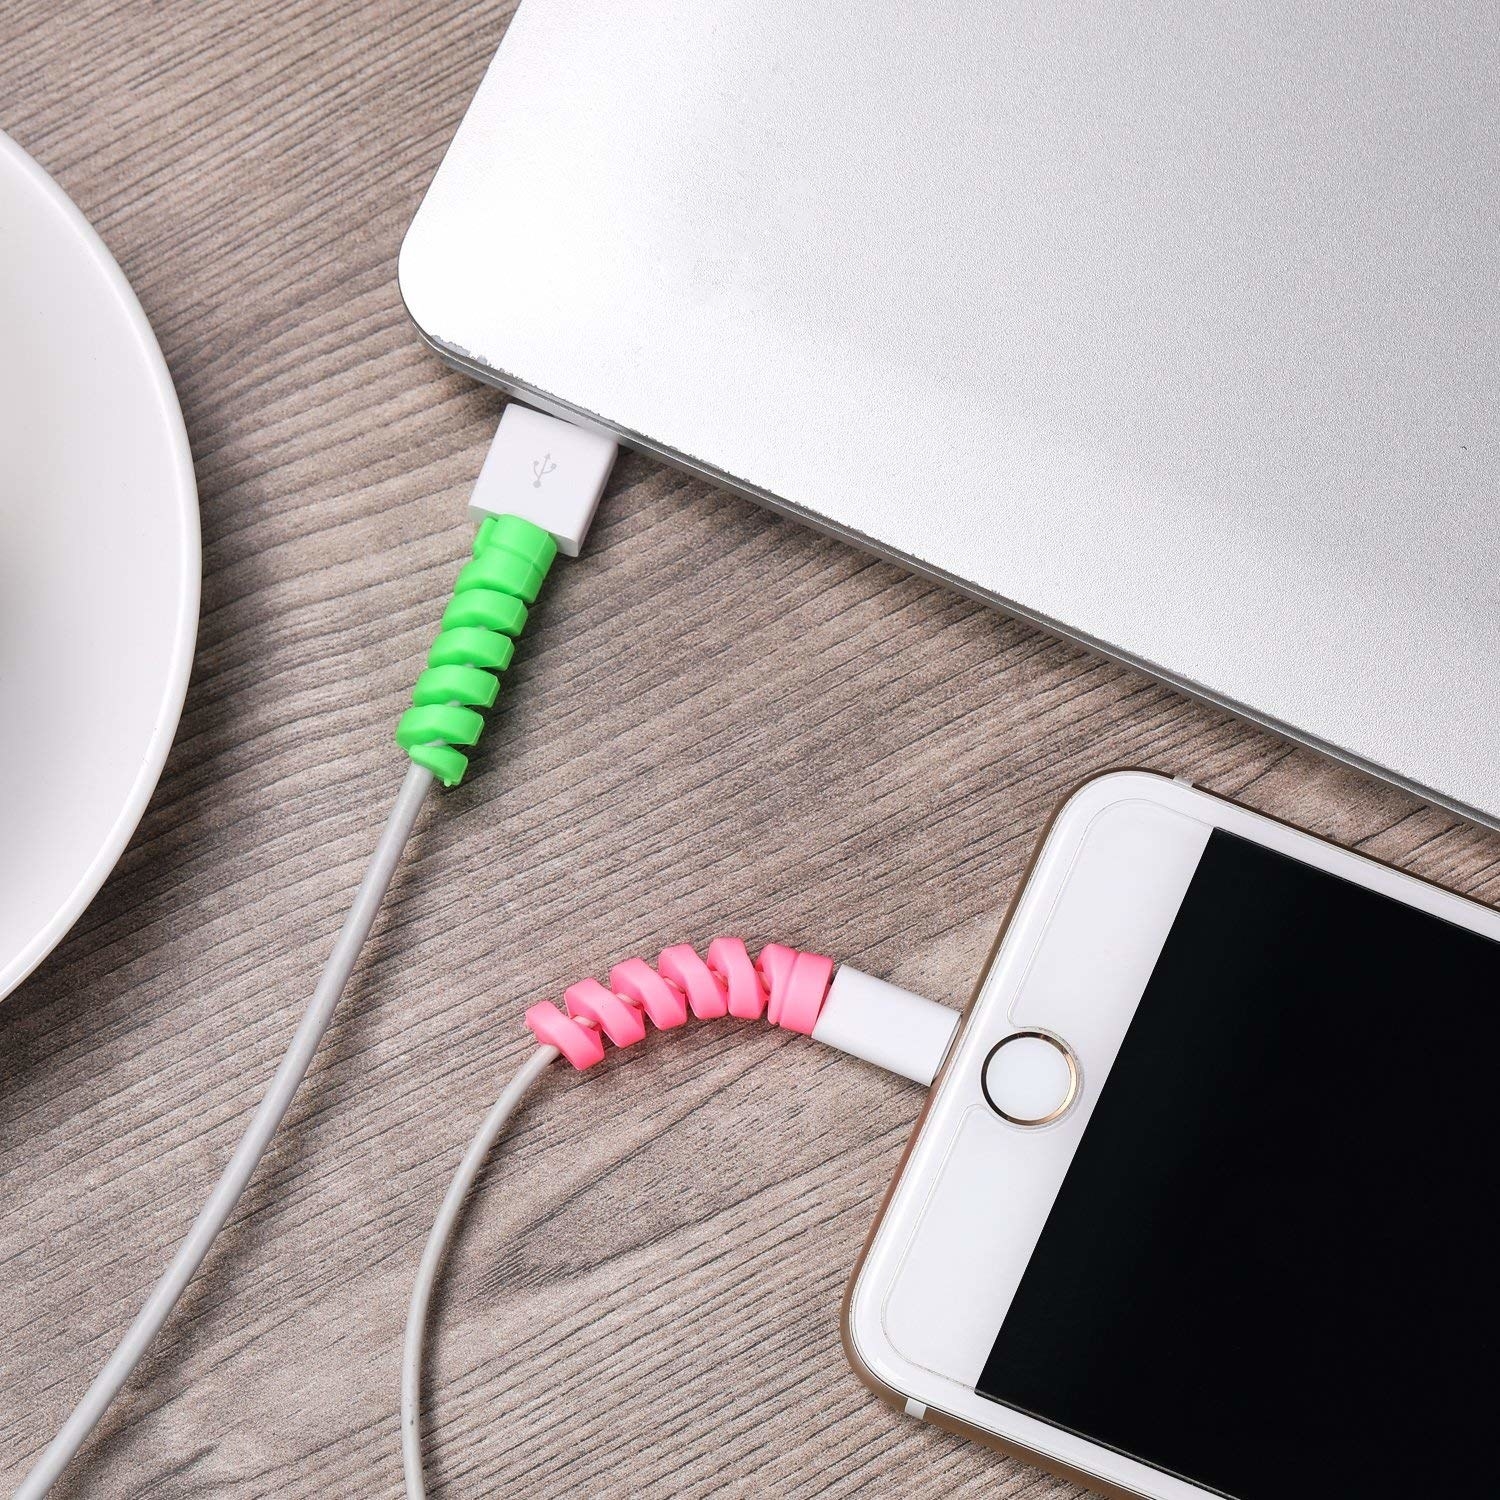 A cable charger protector on an iPhone and an iPad charger